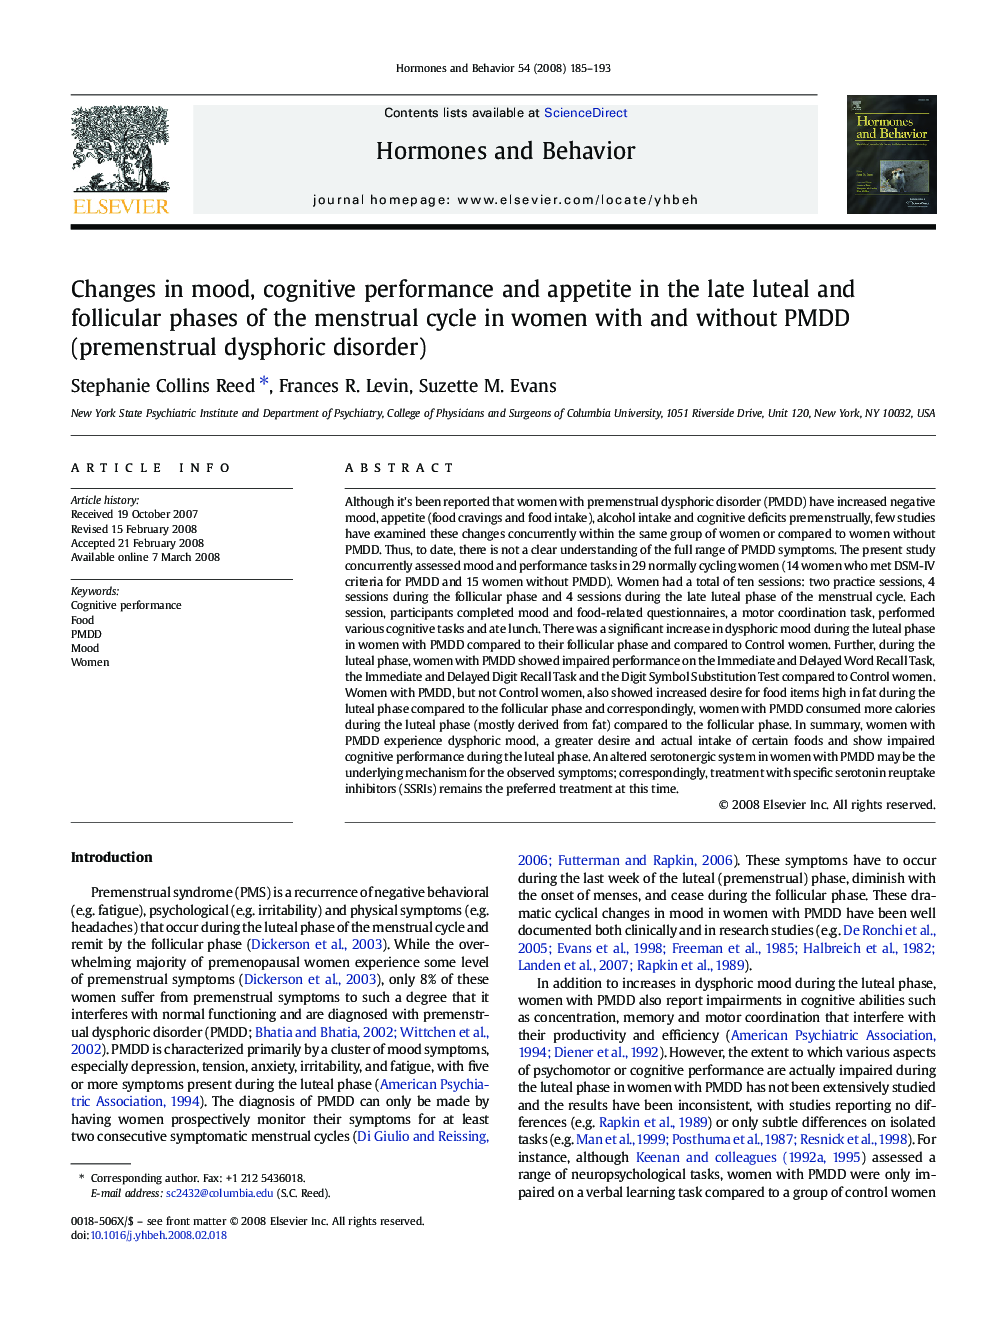 Changes in mood, cognitive performance and appetite in the late luteal and follicular phases of the menstrual cycle in women with and without PMDD (premenstrual dysphoric disorder)